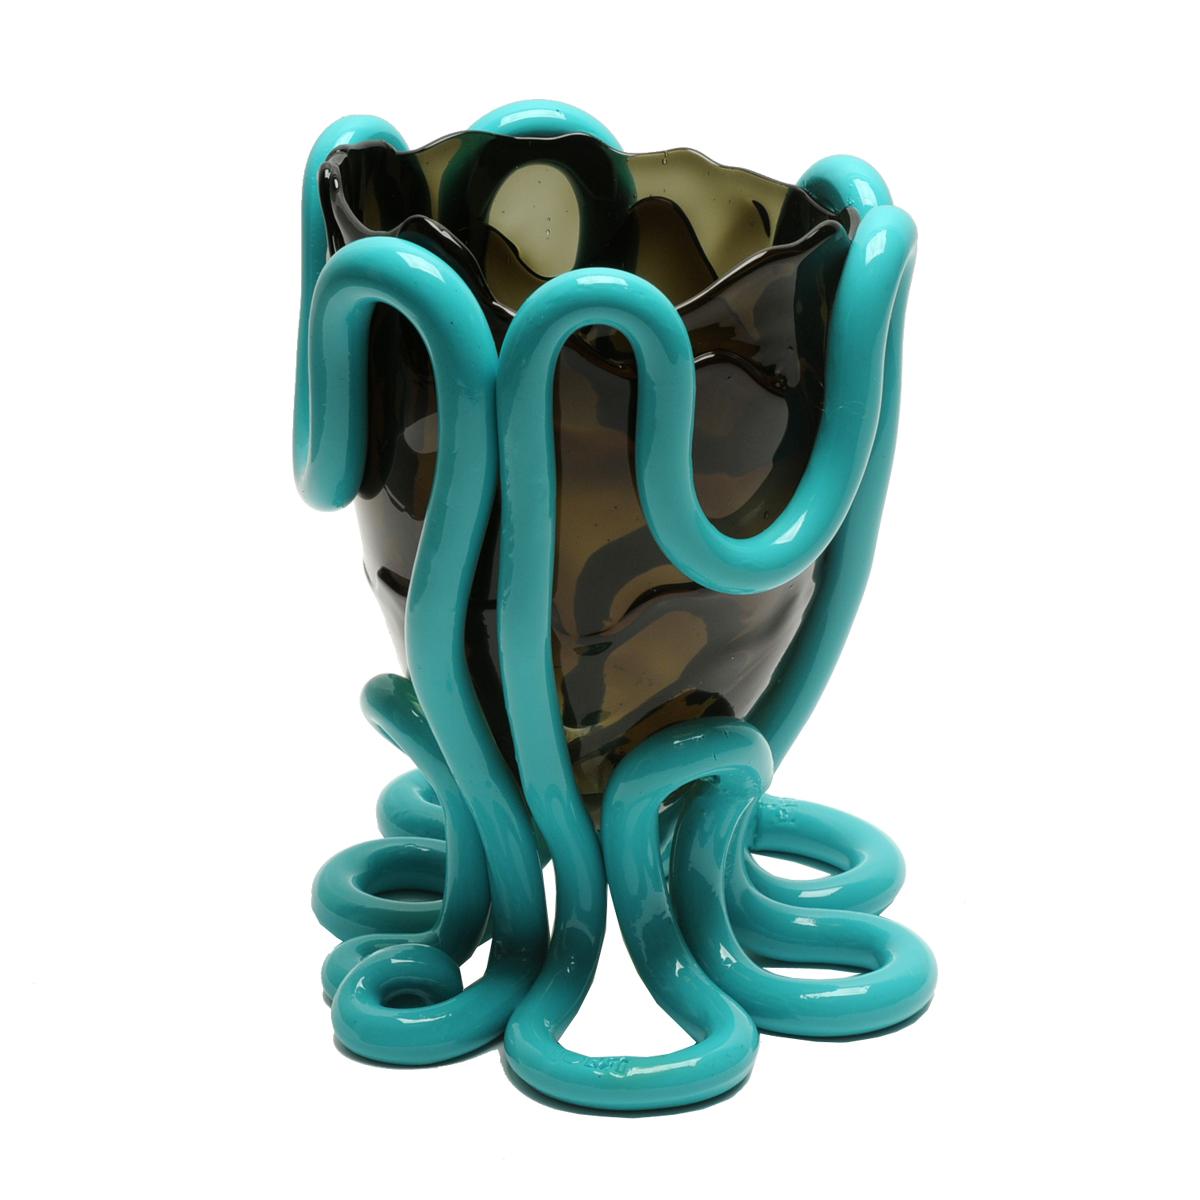 Indian Summer vase - Clear grey and matt turquoise

Vase in soft resin designed by Gaetano Pesce in 1995 for Fish Design collection.
Measures: M - ø 16cm x H 26cm
Colours: Clear grey and matte turquoise.

Other sizes available.
Vase in soft resin